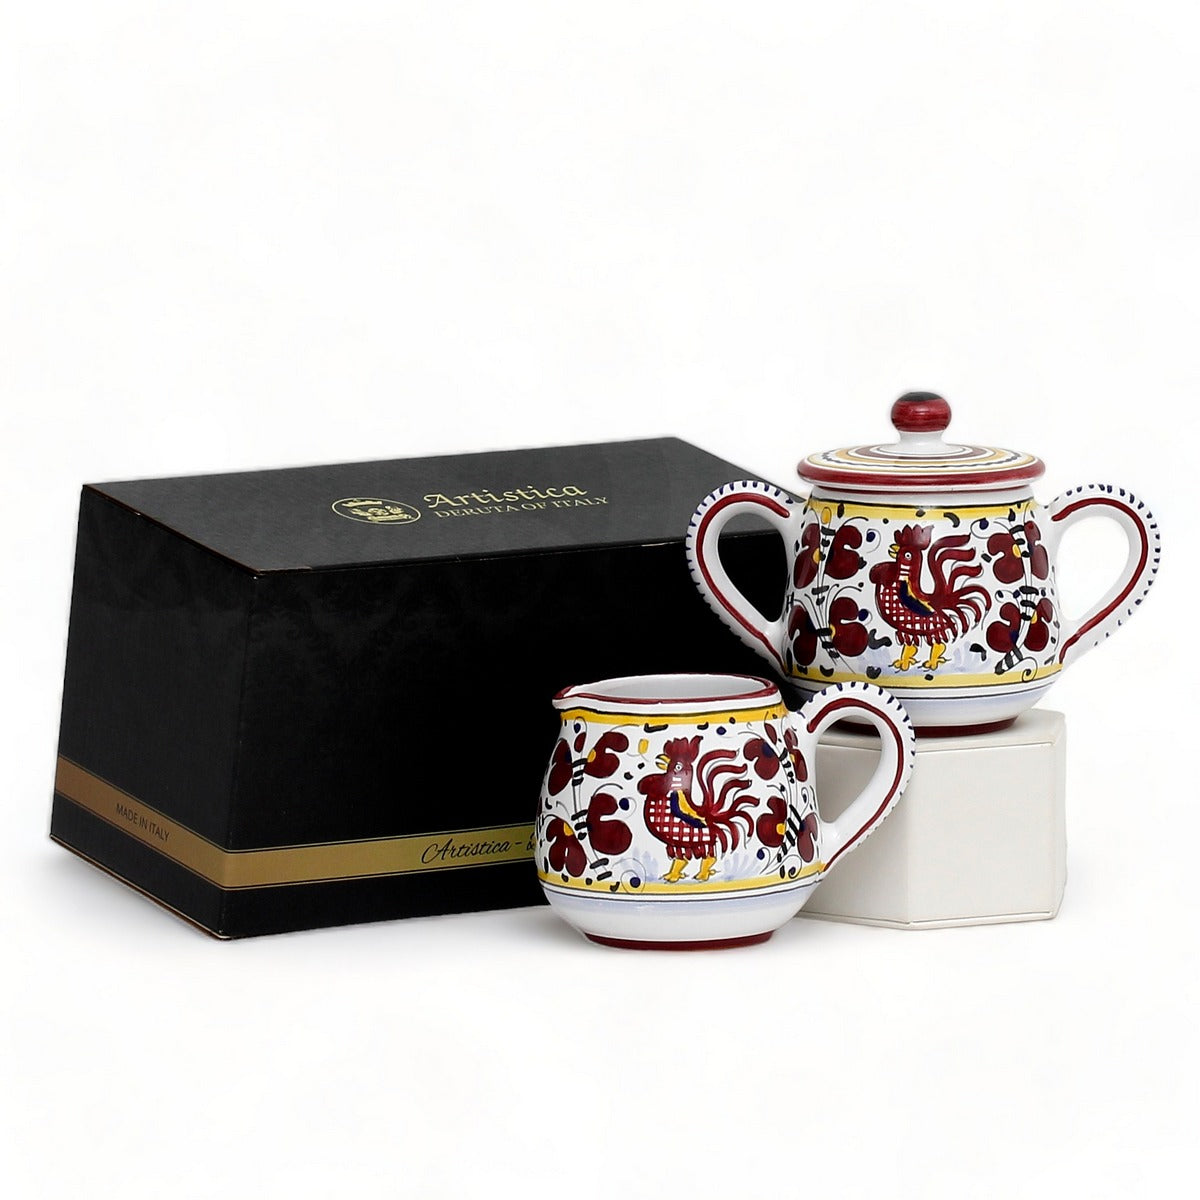 GIFT BOX: With authentic Deruta hand painted ceramic - Cream &amp; Sugar Red Rooster Rooster design